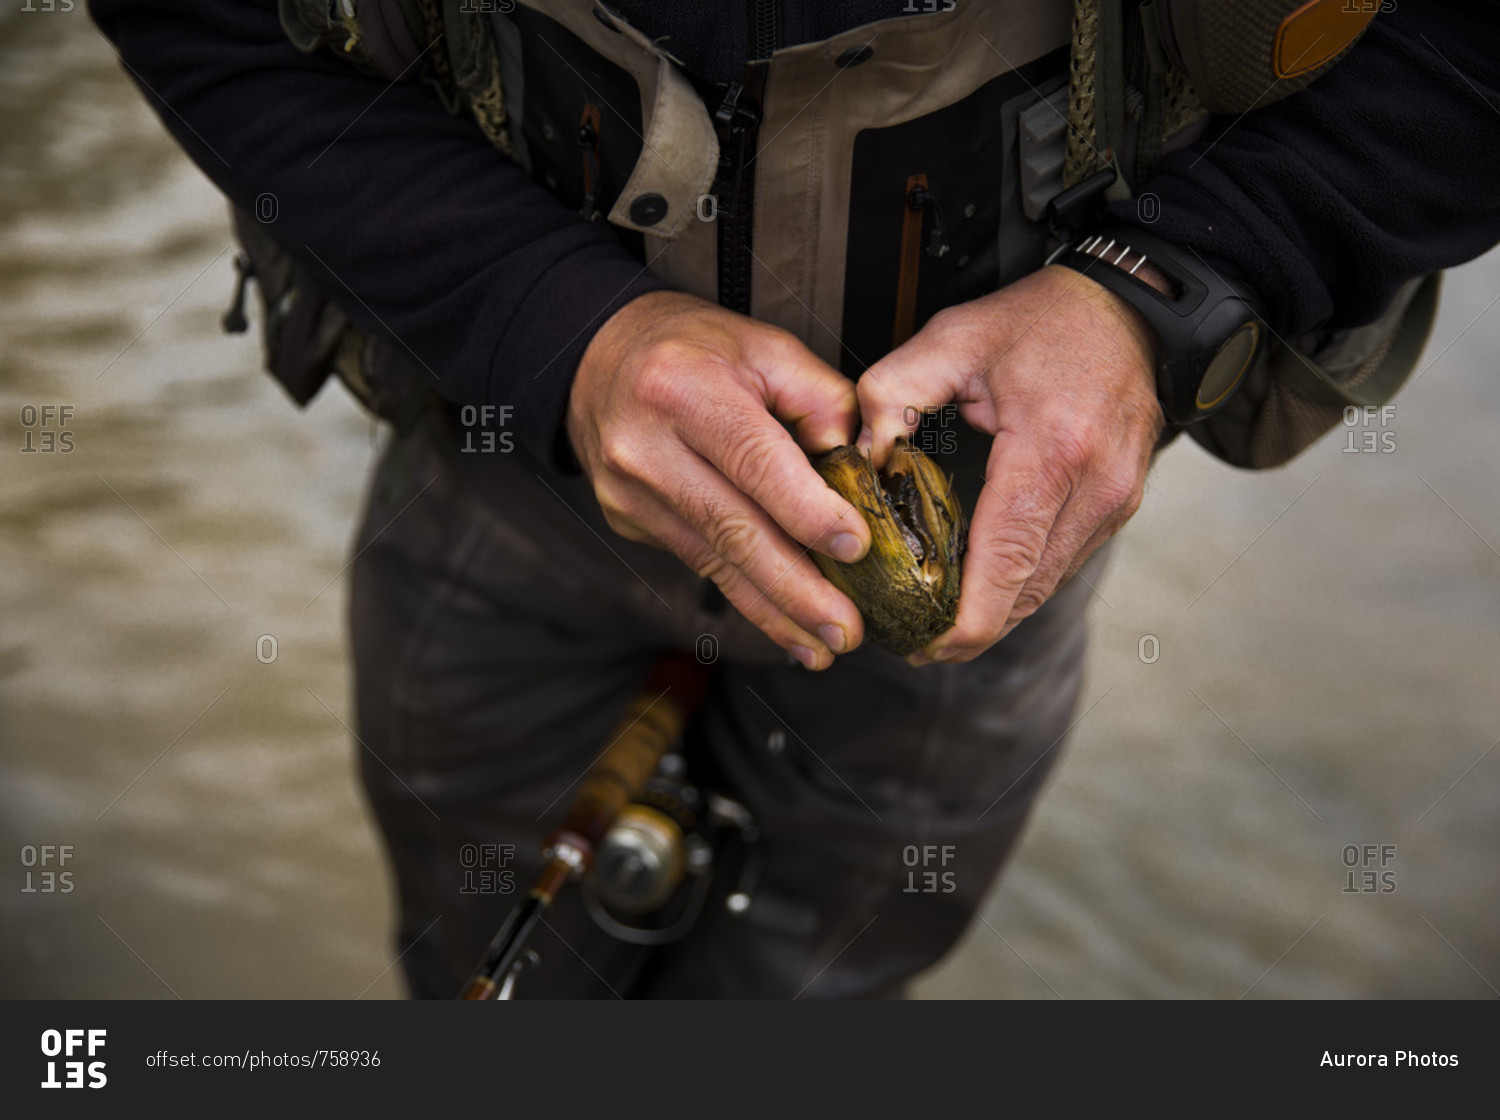 Mid section of fisherman trying to open clam from Grand River, Hamilton, Ontario, Canada